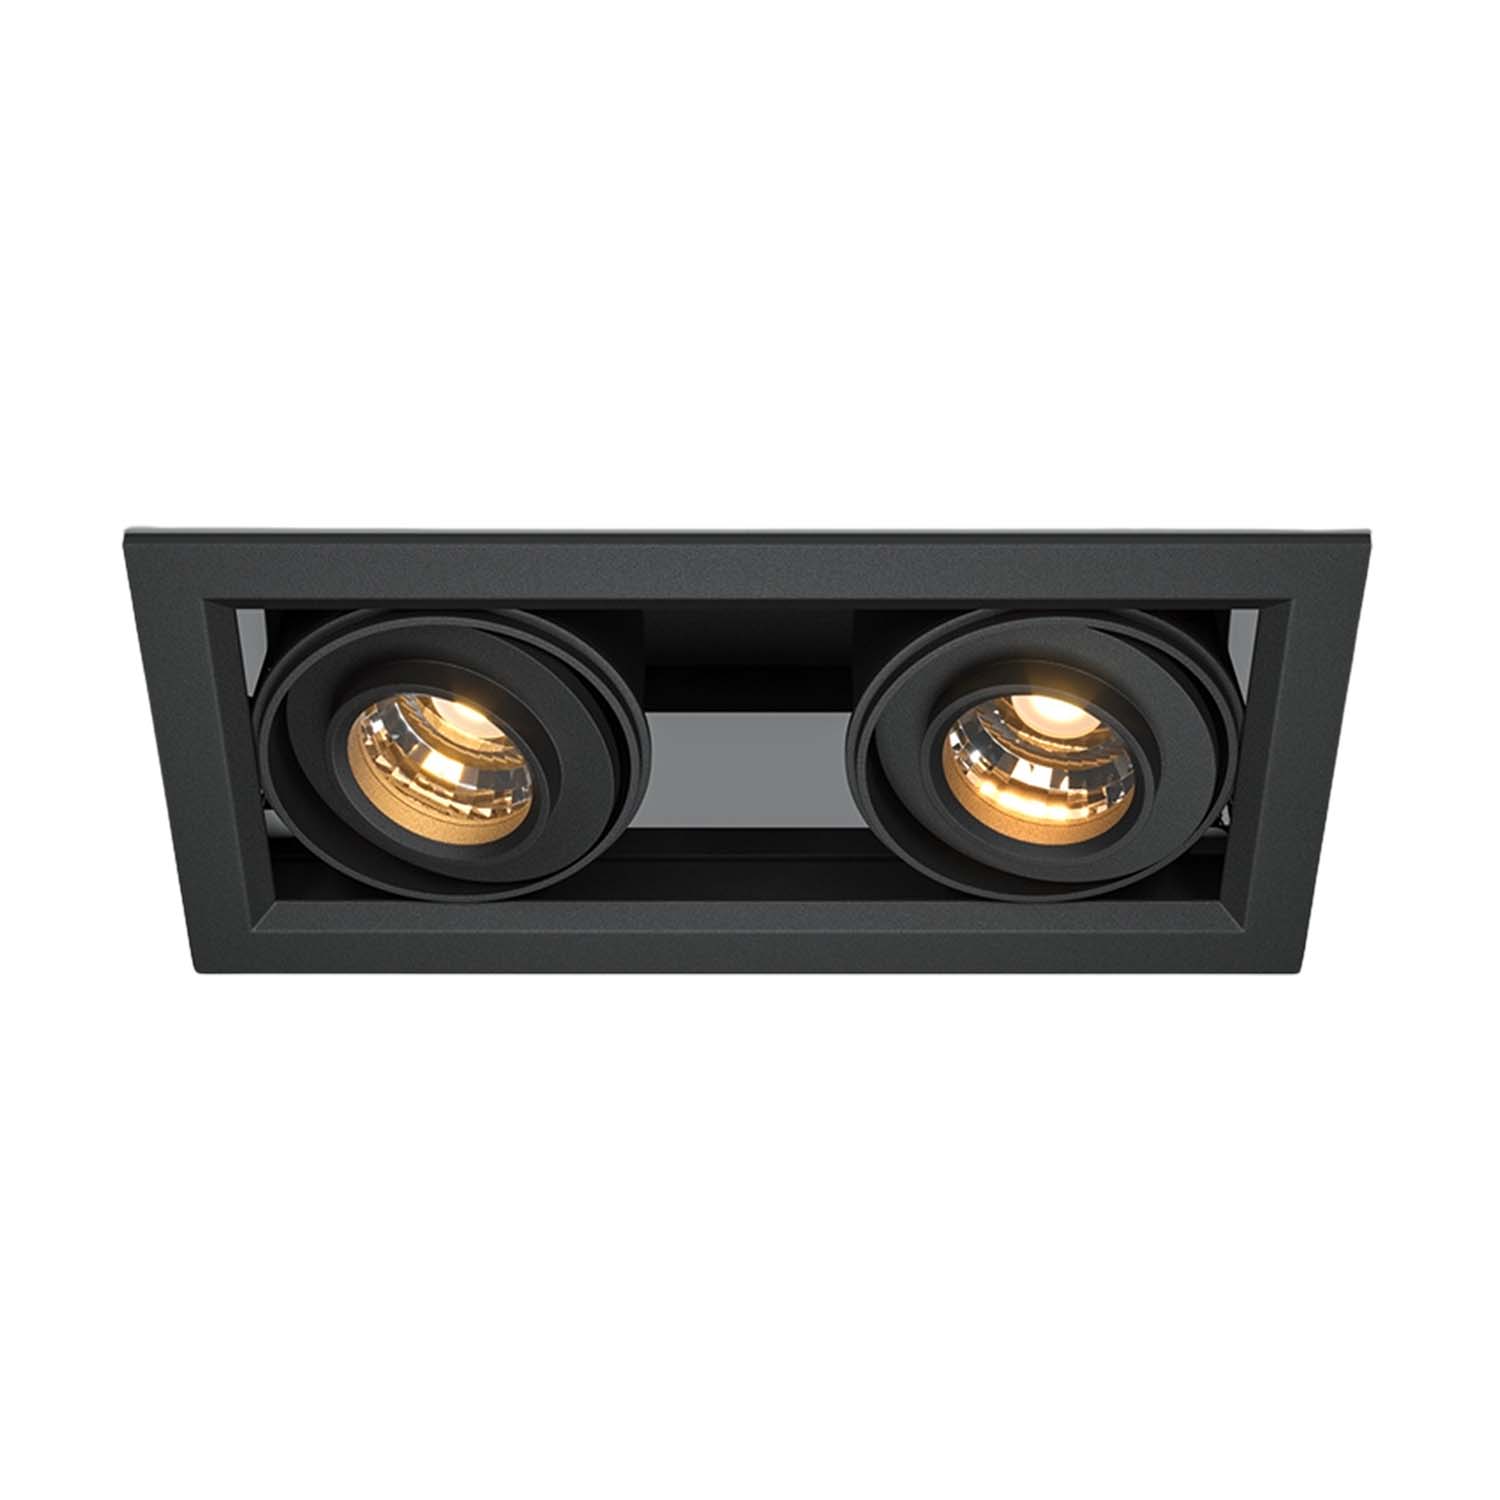 METAL MODERN - Double integrated LED recessed spotlight in aluminum